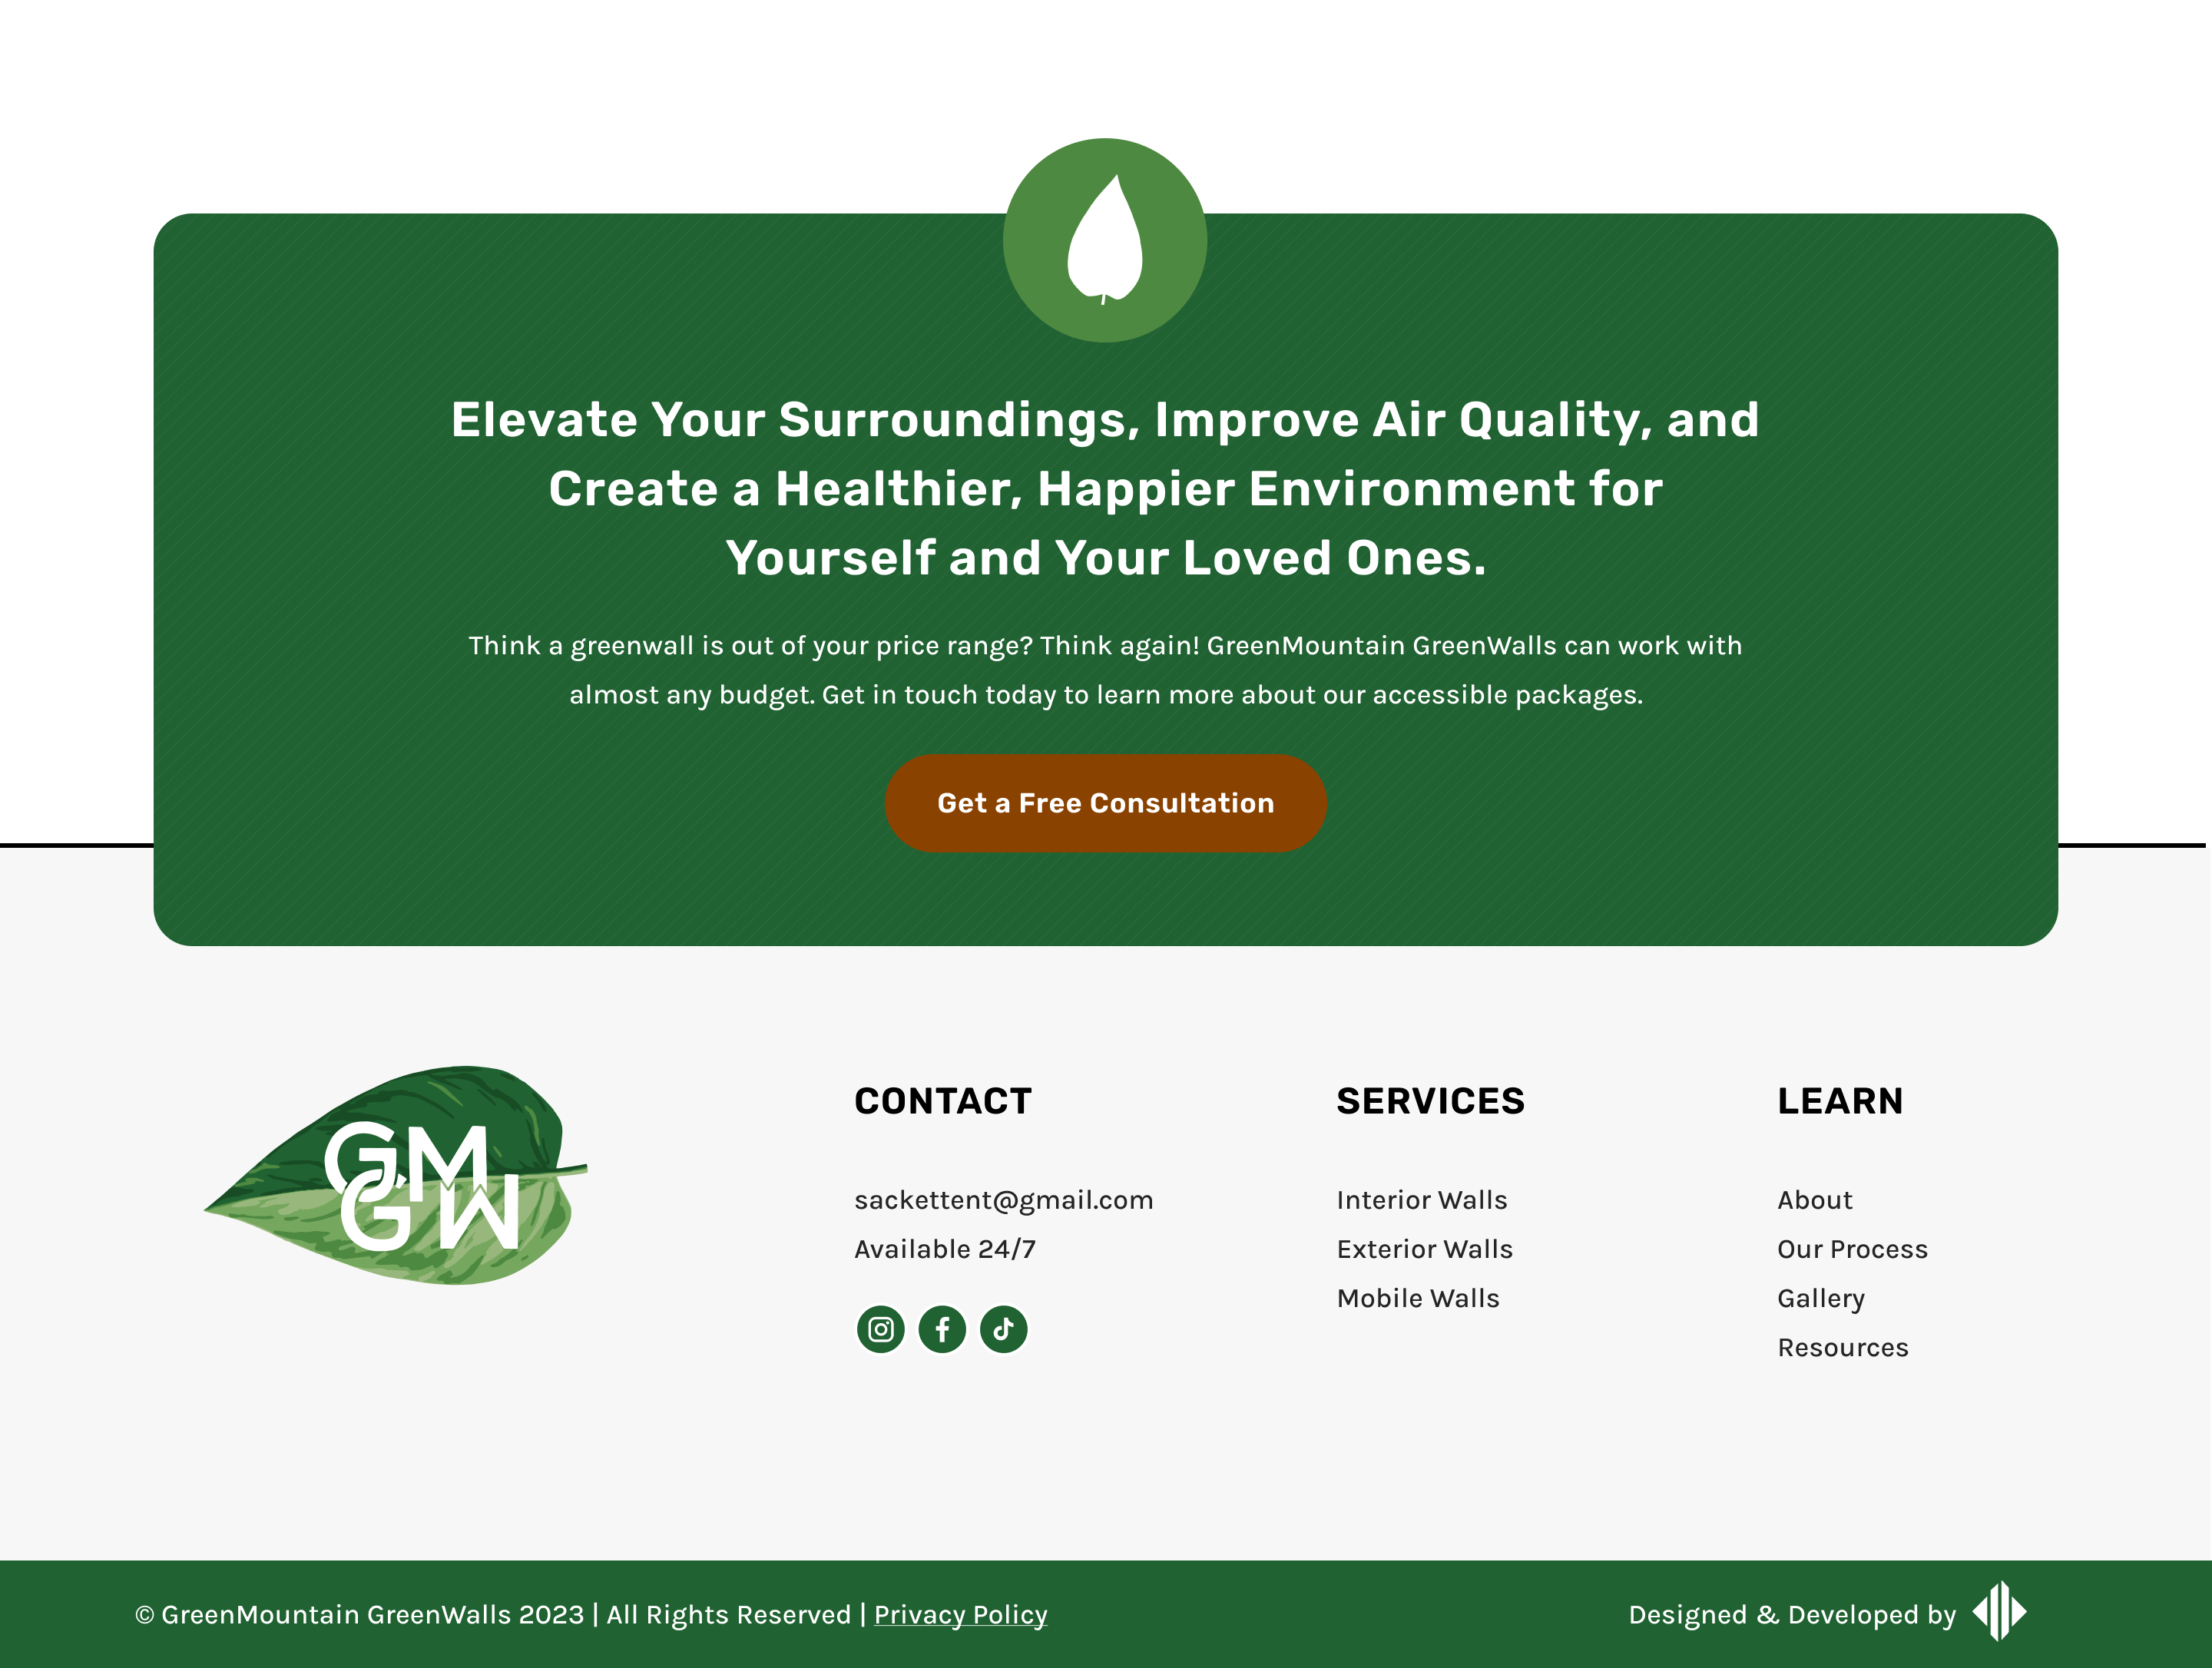 A green website design with a green background.